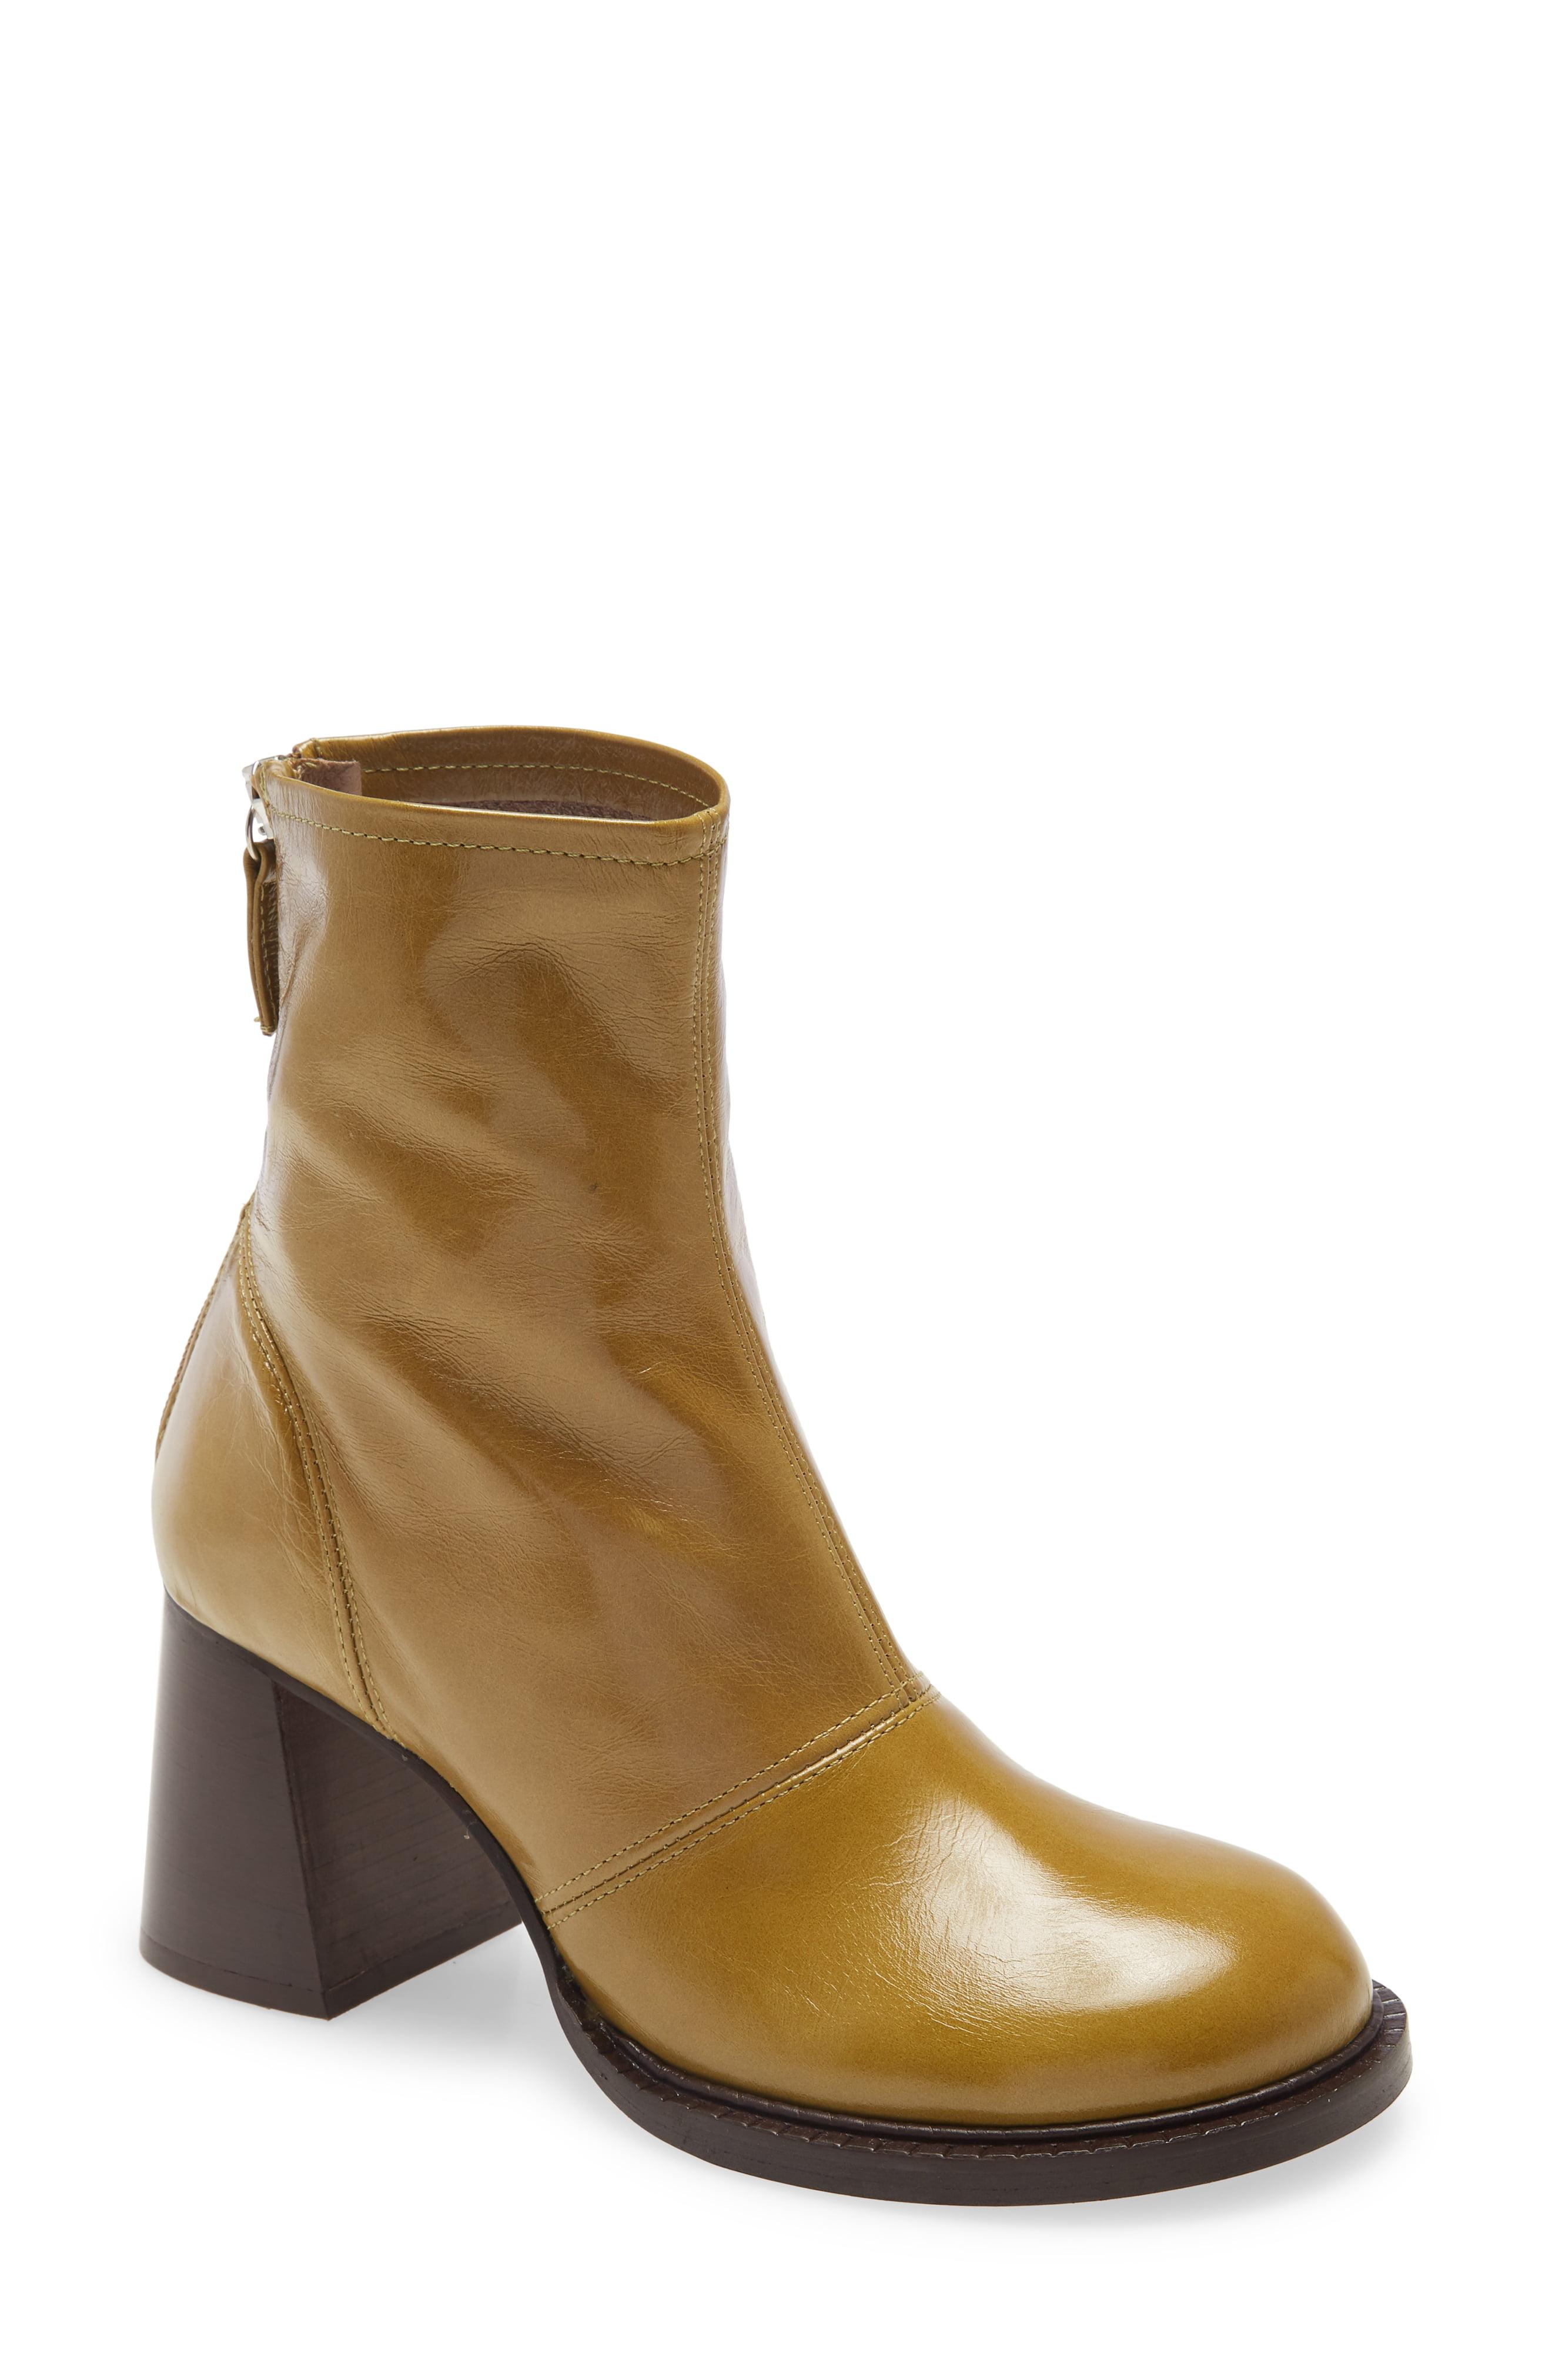 TOPSHOP Ilopatent Leather Chunky Scoop Toe Boots in Green - Lyst